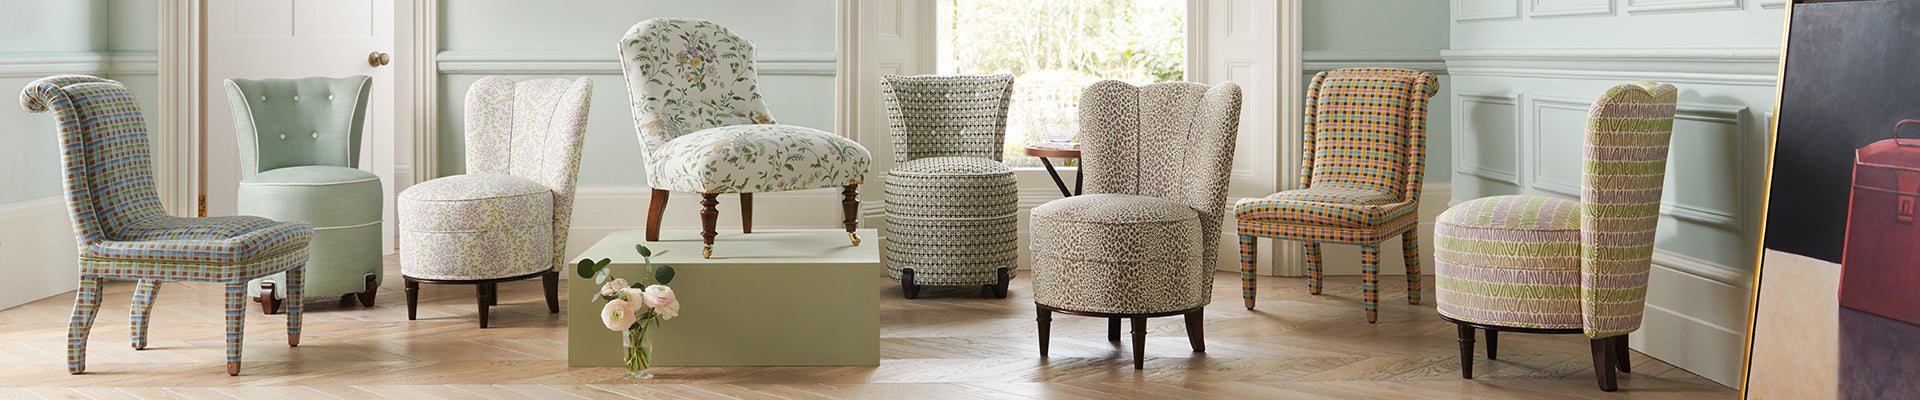 collection of small upholstered chairs in different fabrics and patterns in a blue room with wood floors